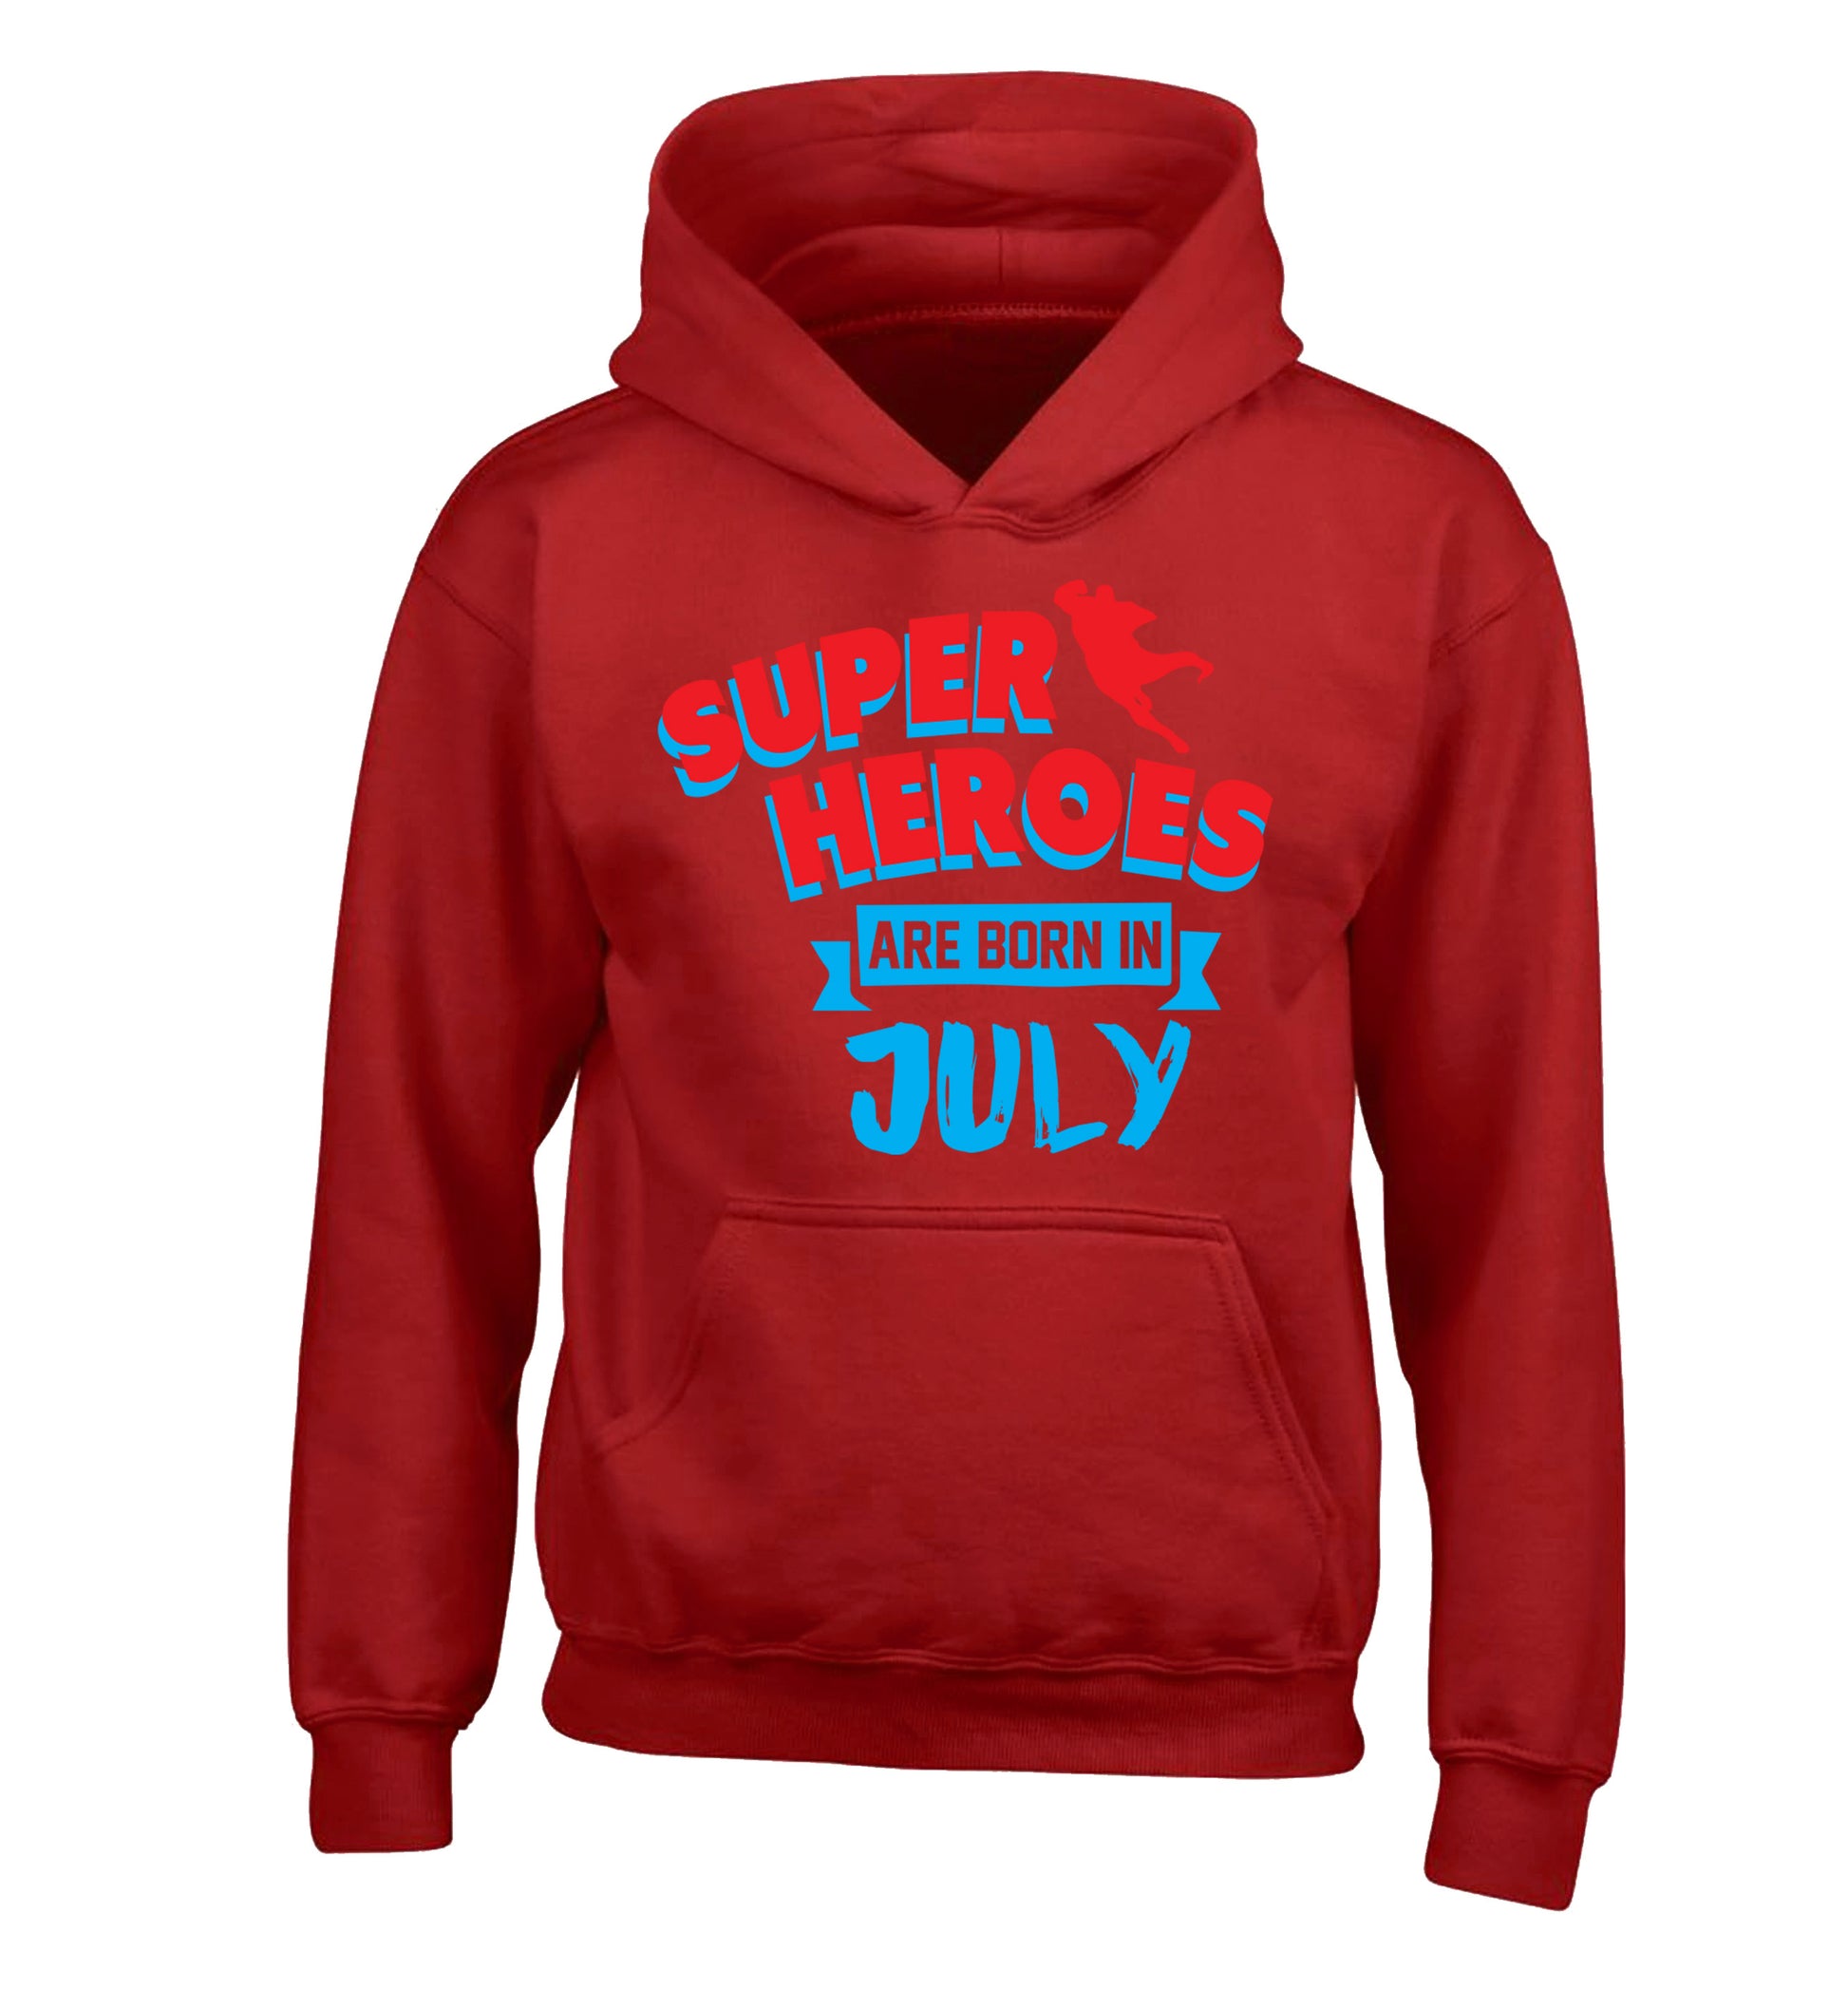 Superheroes are born in July children's red hoodie 12-13 Years